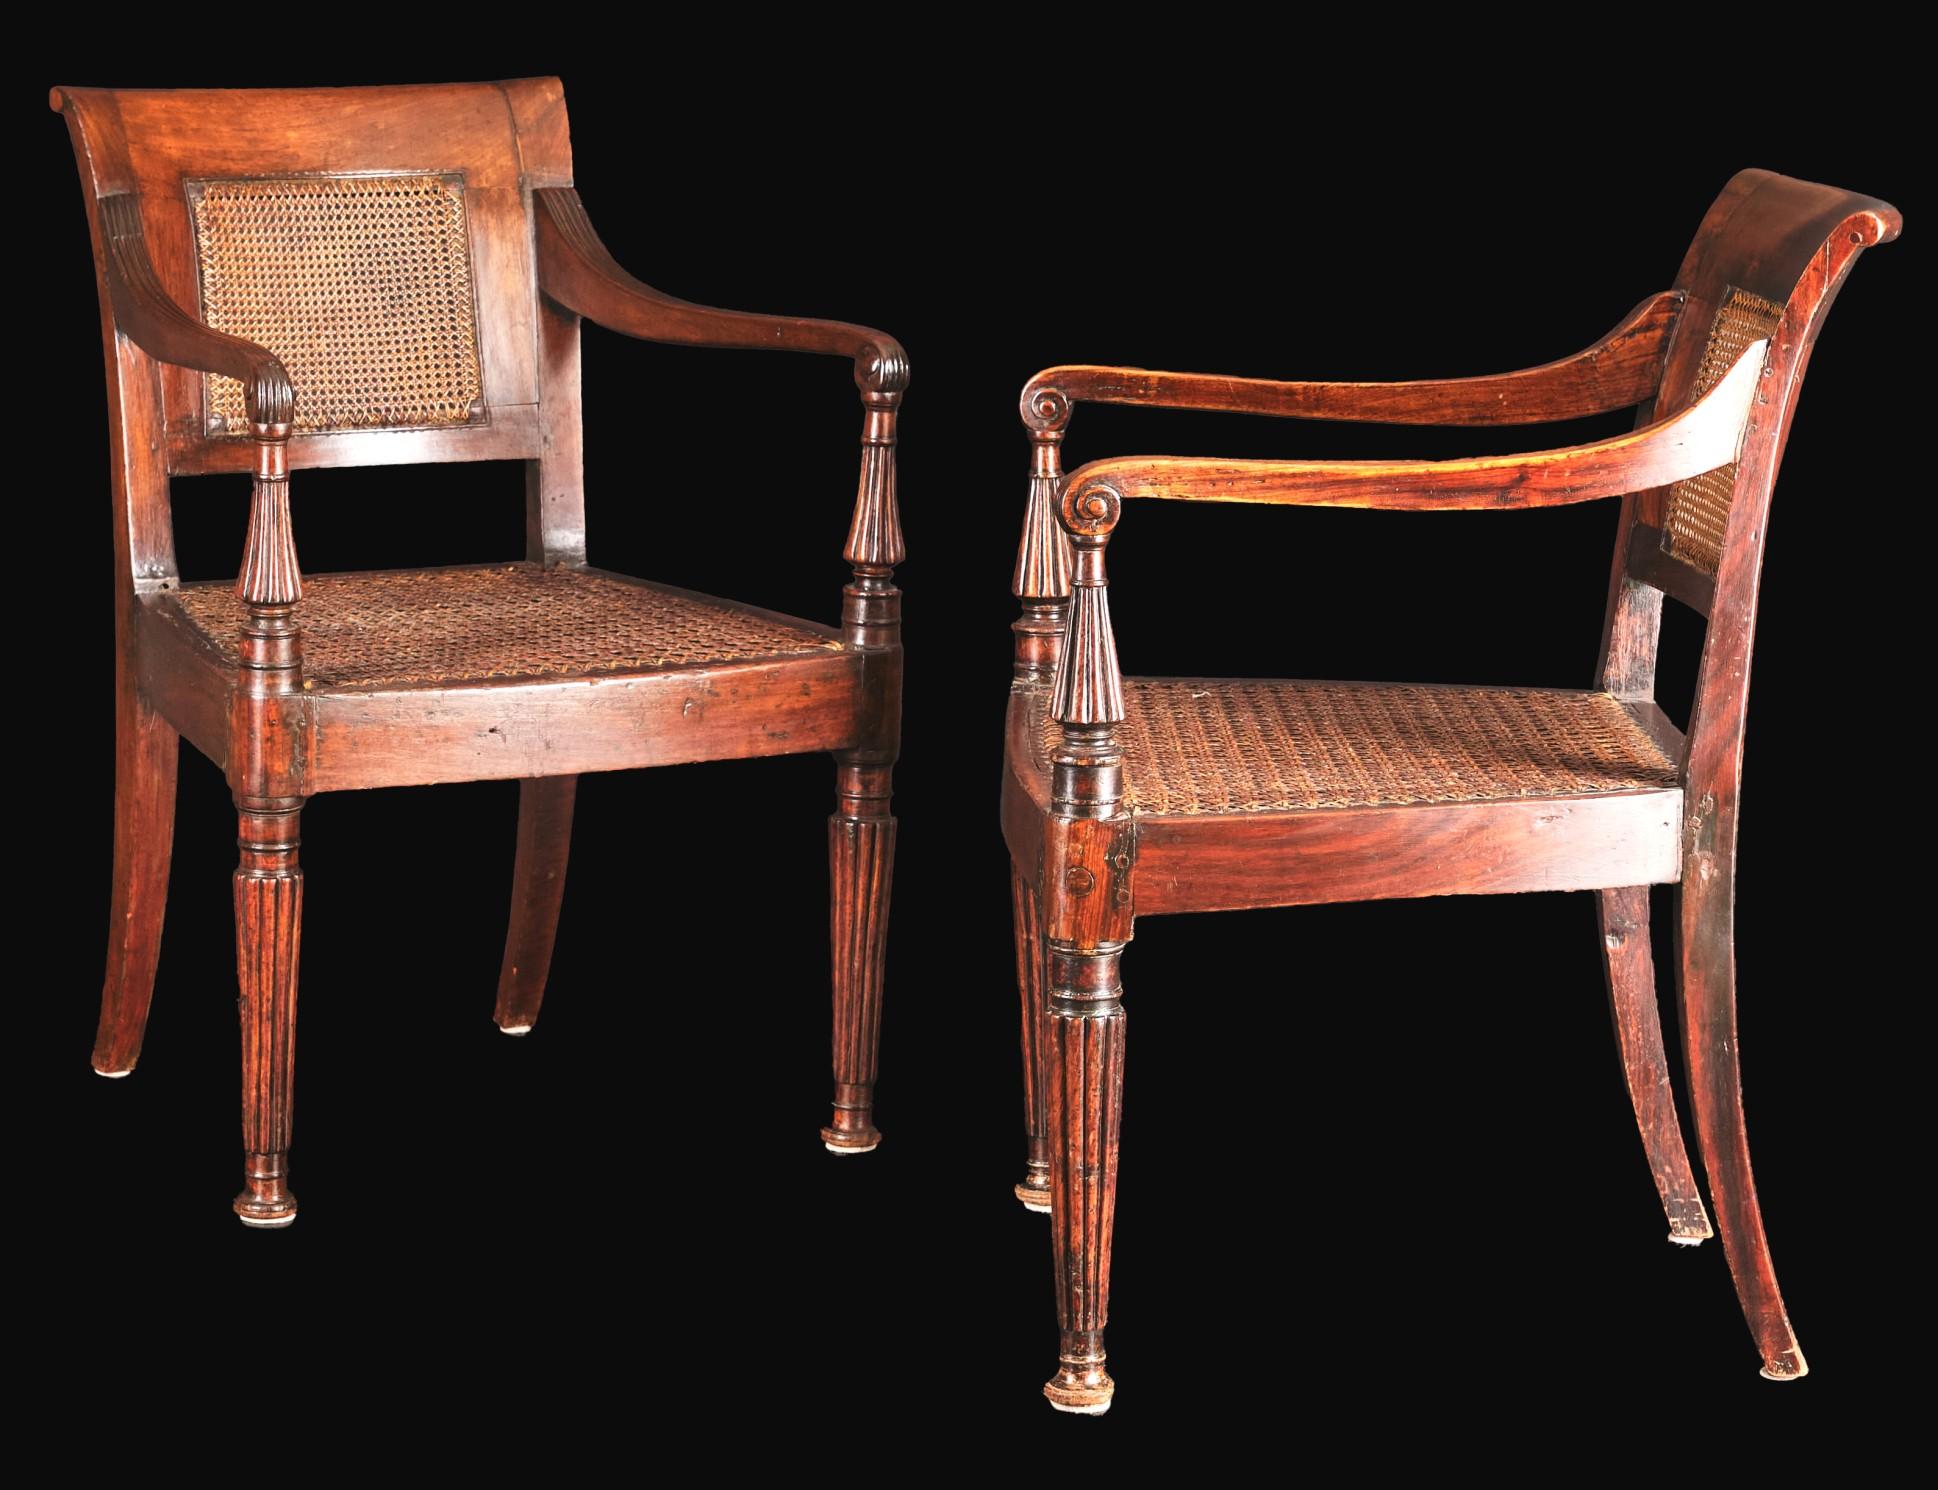 A very handsome pair of 19th century Anglo-Indian armchairs, showing richly figured padouk wood frames of pegged construction, with caned backs & seats sided by swept armrest atop flaring & reeded supports, raised overall on reeded front supports